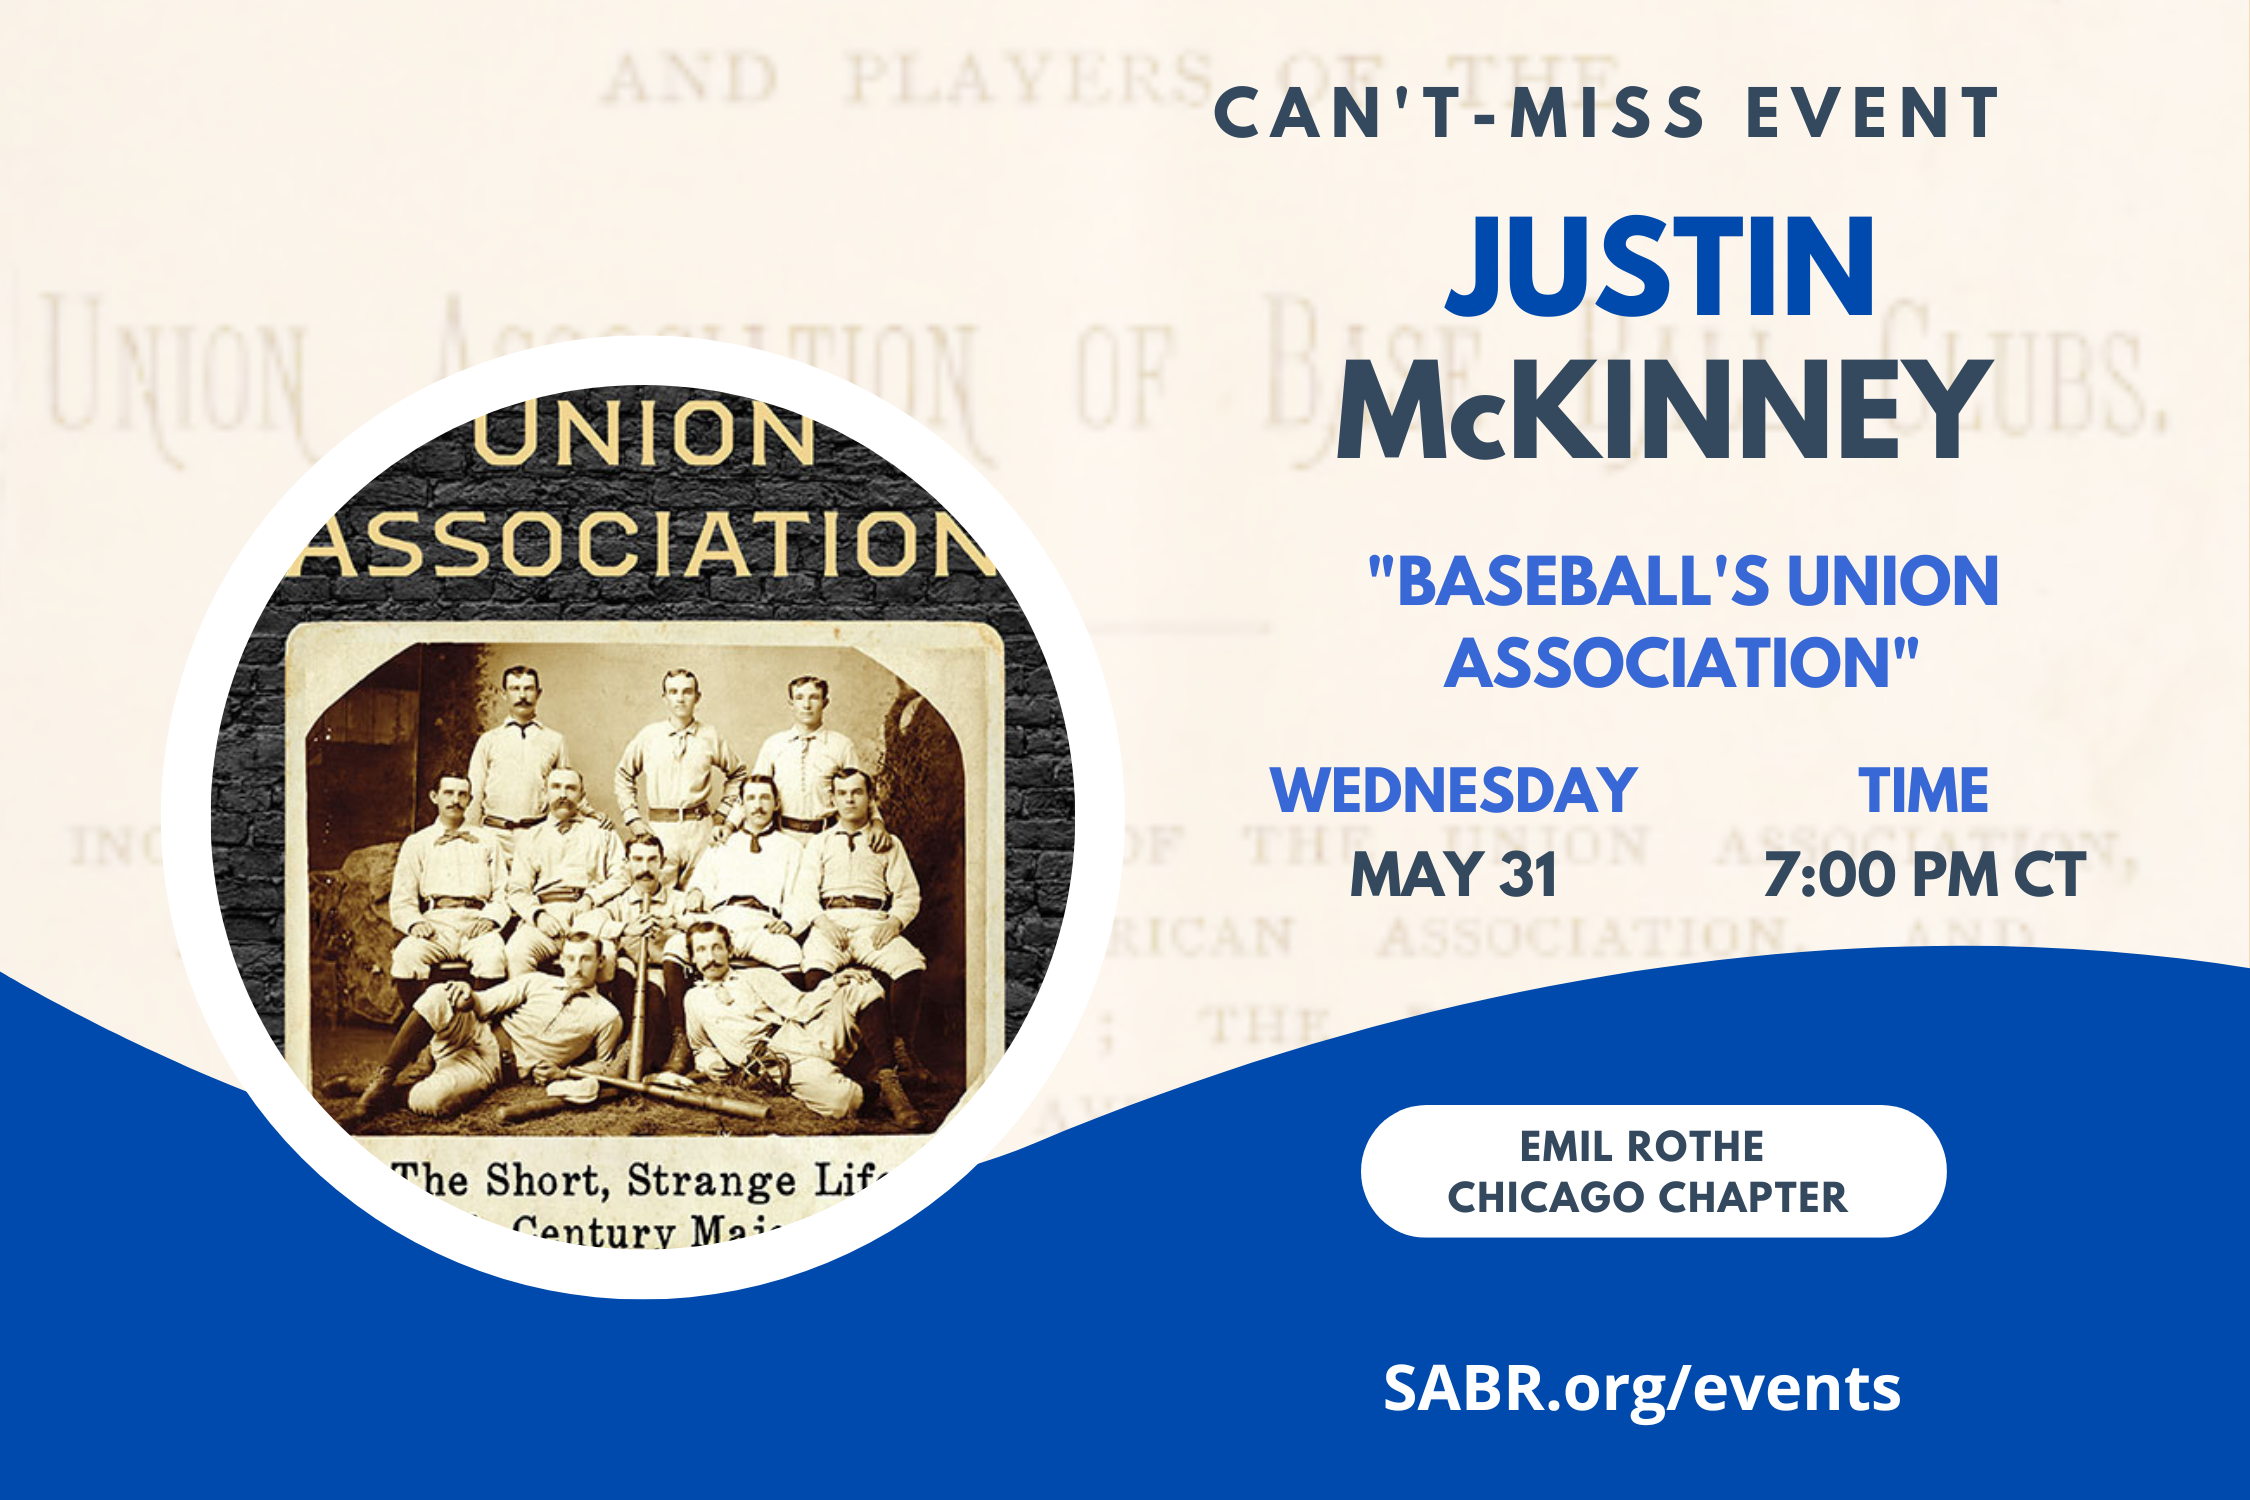 All baseball fans are invited to join SABR's Chicago Chapter for a virtual Zoom meeting at 7:00 p.m. CDT on Wednesday, May 31, 2023. Author Justin Mckinney will discuss his award-winning book "Baseball's Union Association: The Short, Strange Life of a 19th Century Major League"